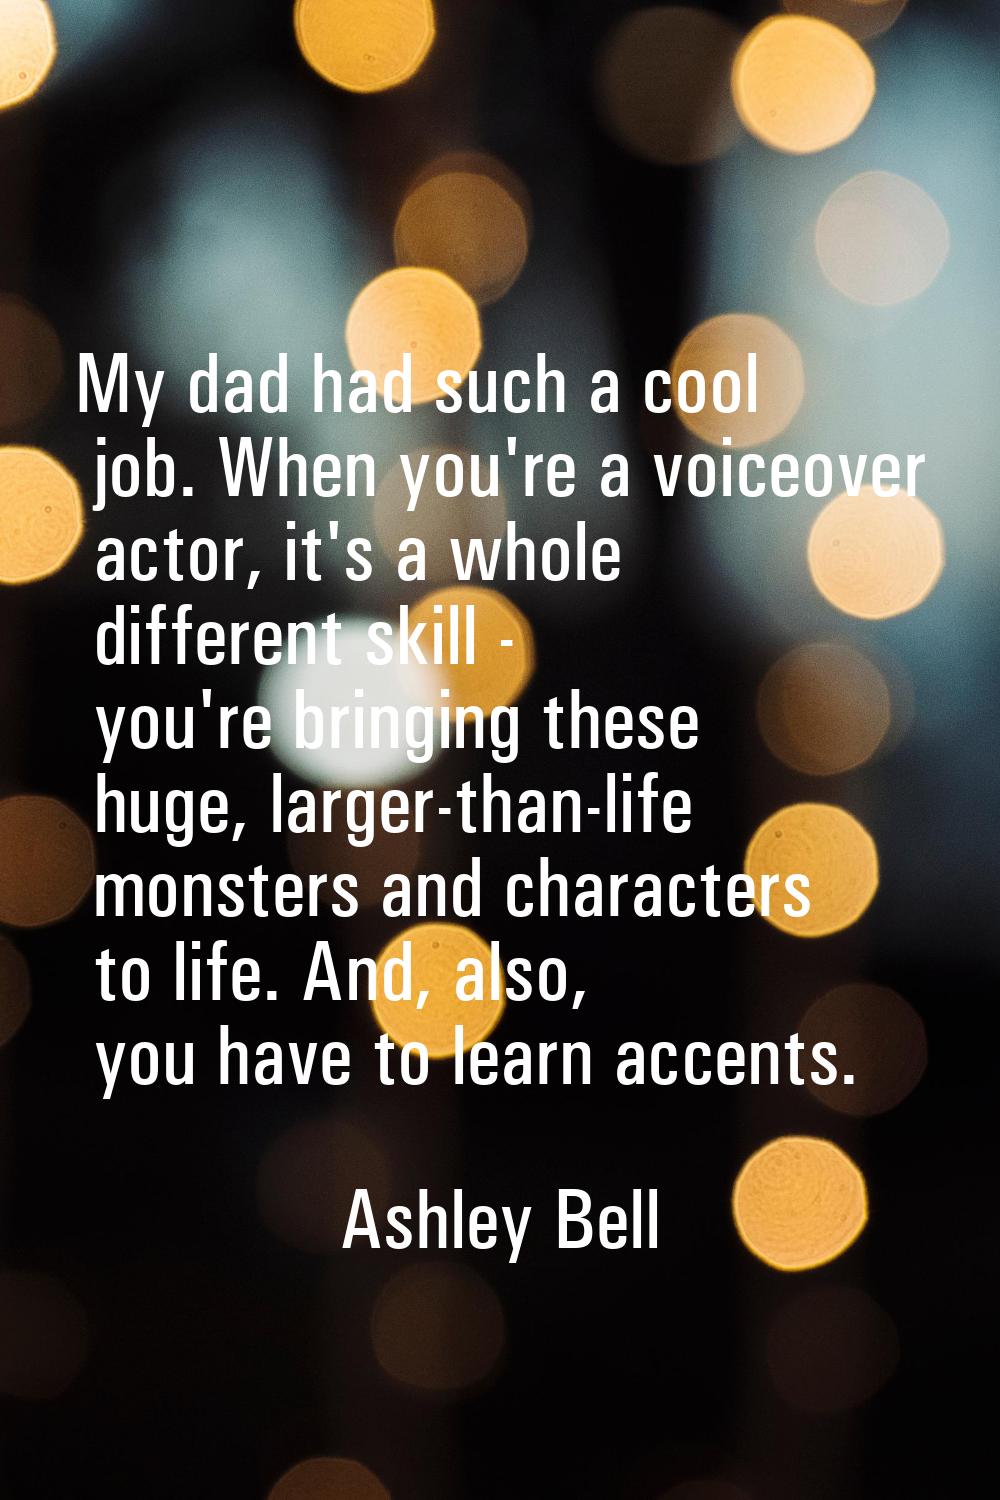 My dad had such a cool job. When you're a voiceover actor, it's a whole different skill - you're br